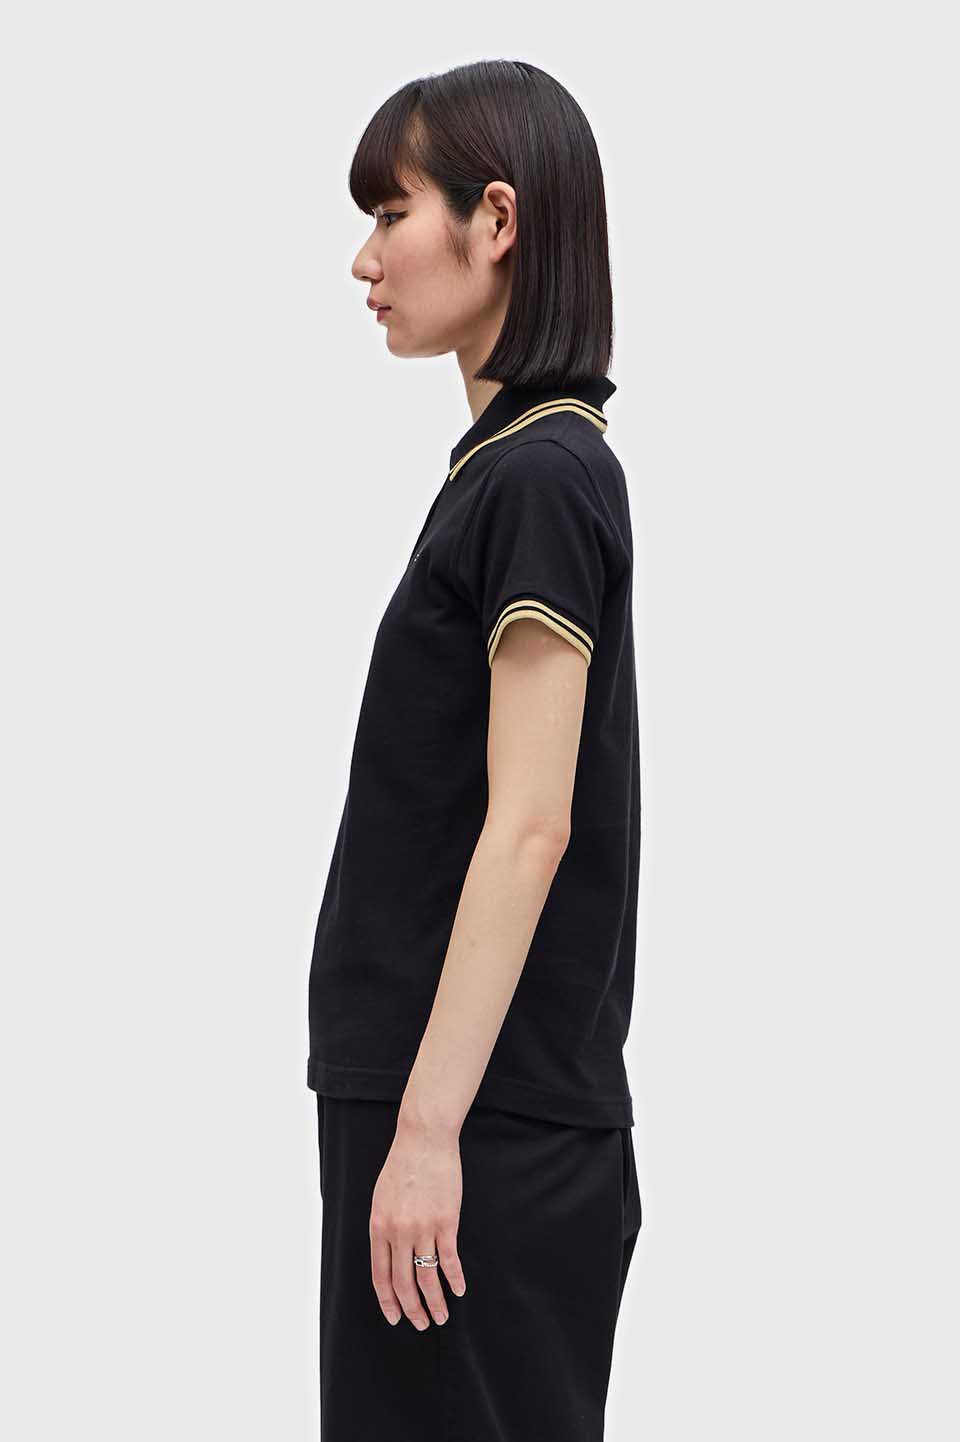 The Fred Perry Shirt - G12(8 157：BLACK / CHAMPAGNE): | FRED PERRY